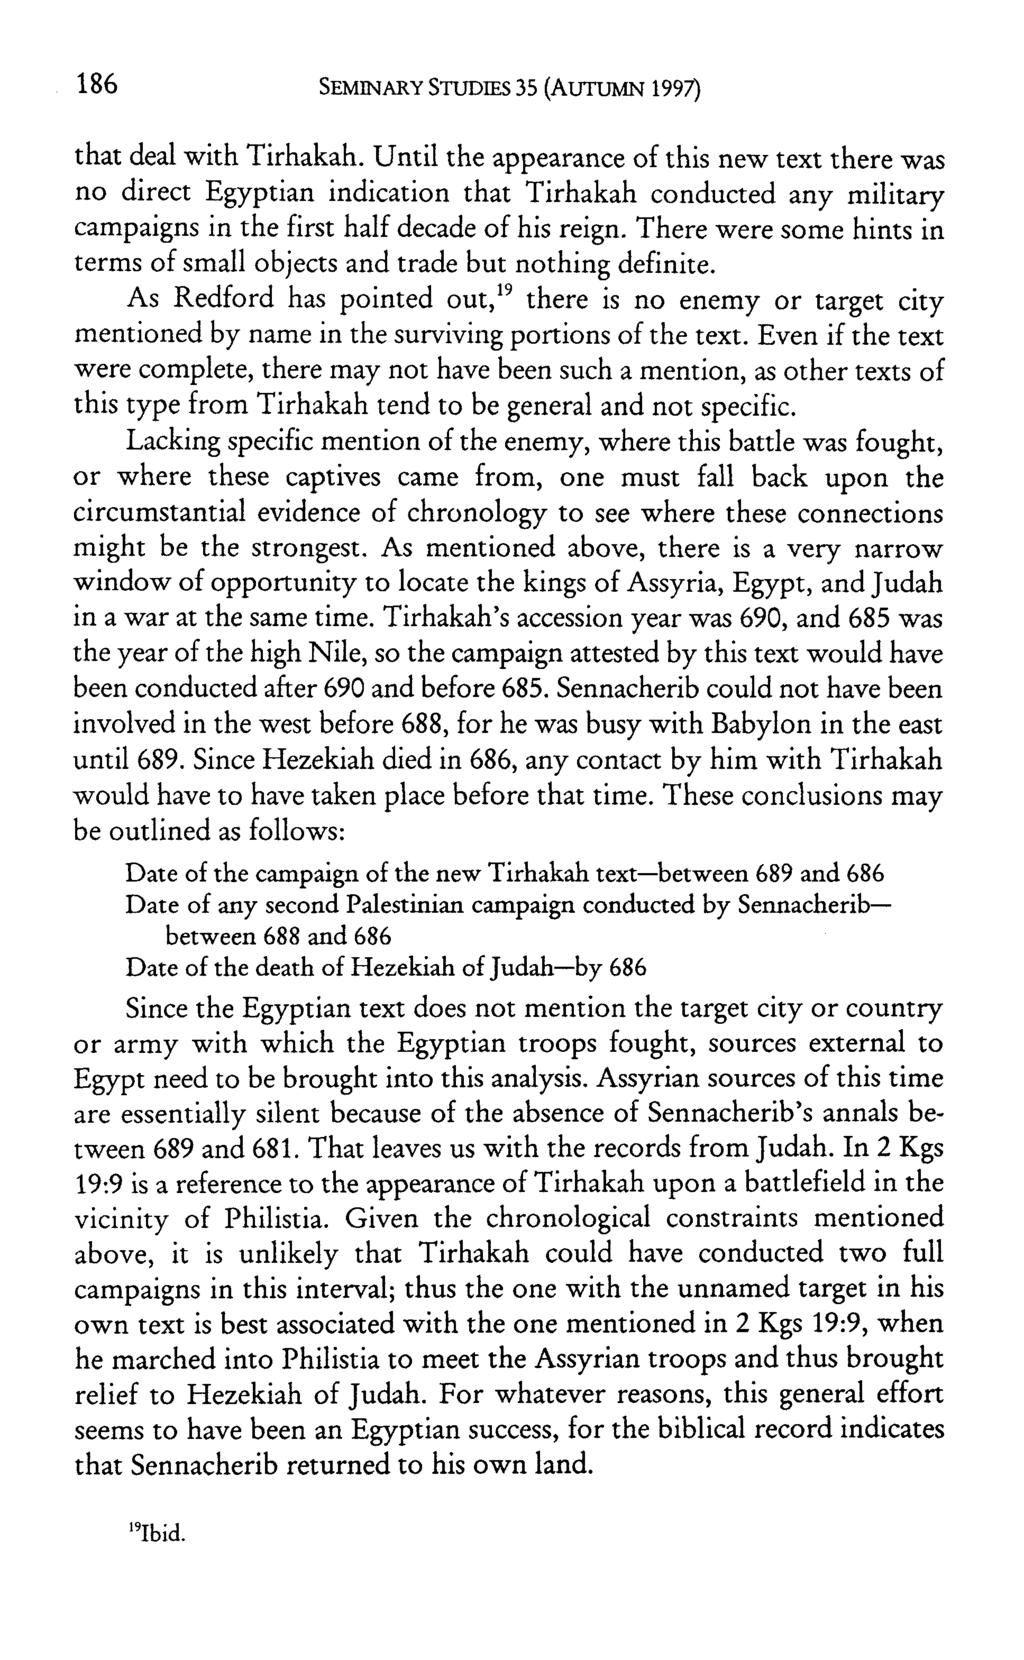 that deal with Tirhakah. Until the appearance of this new text there was no direct Egyptian indication that Tirhakah conducted any military campaigns in the first half decade of his reign.